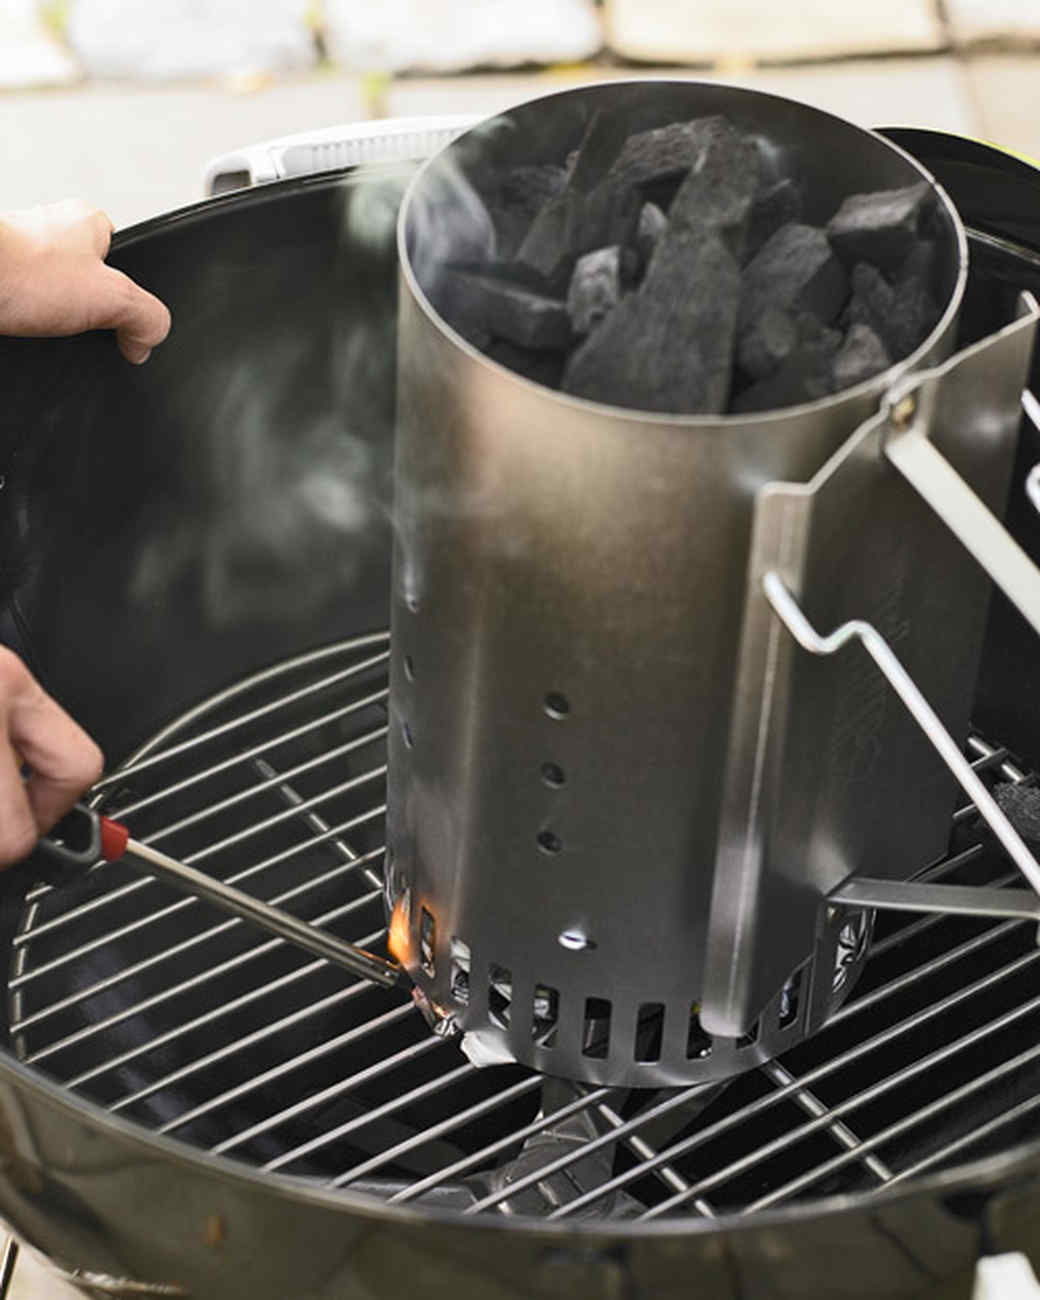 How do you start a charcoal grill?